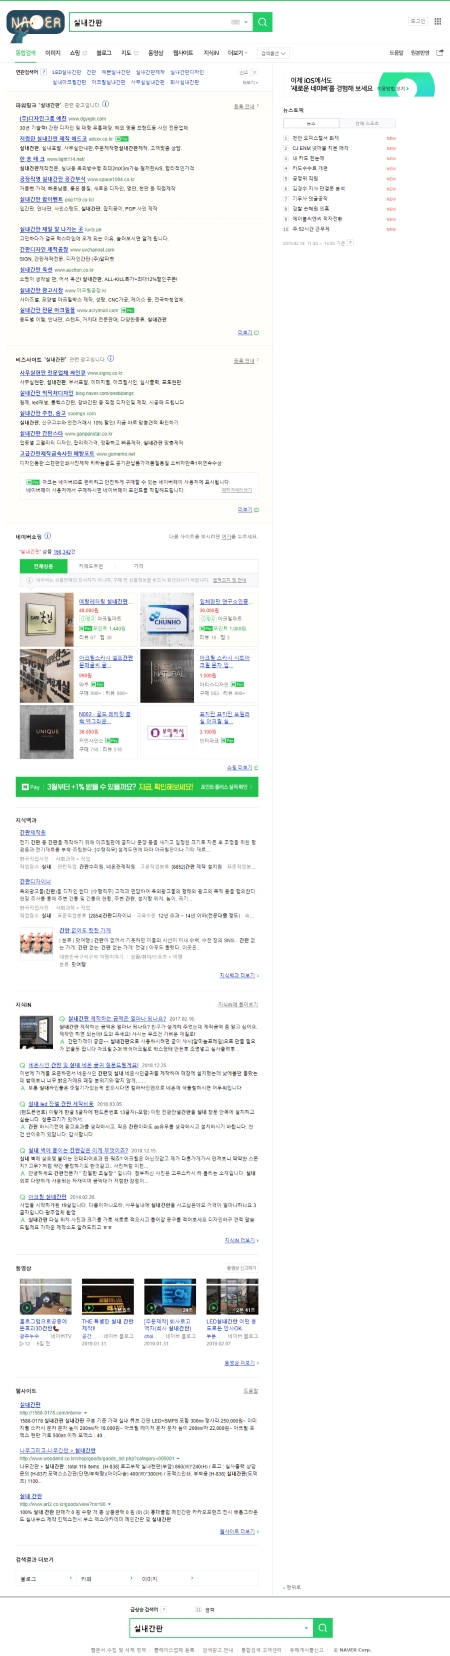 Naver full results page